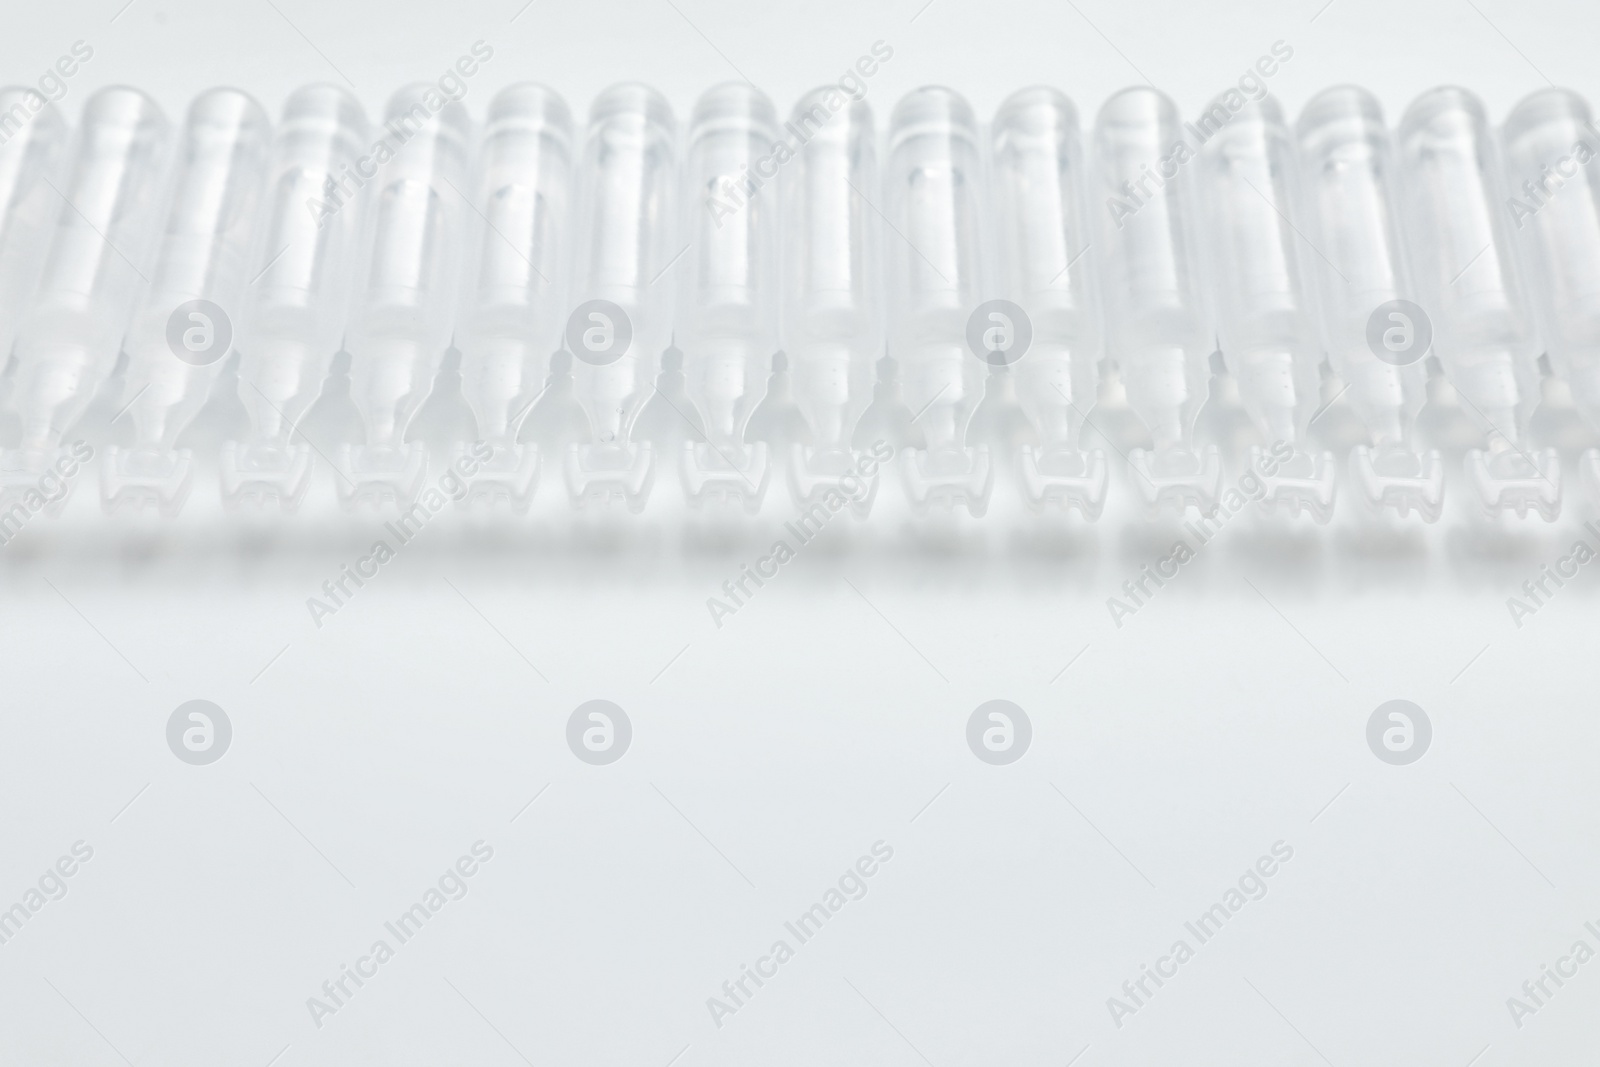 Photo of Single dose ampoules of sterile isotonic sea water solution on white background. Space for text